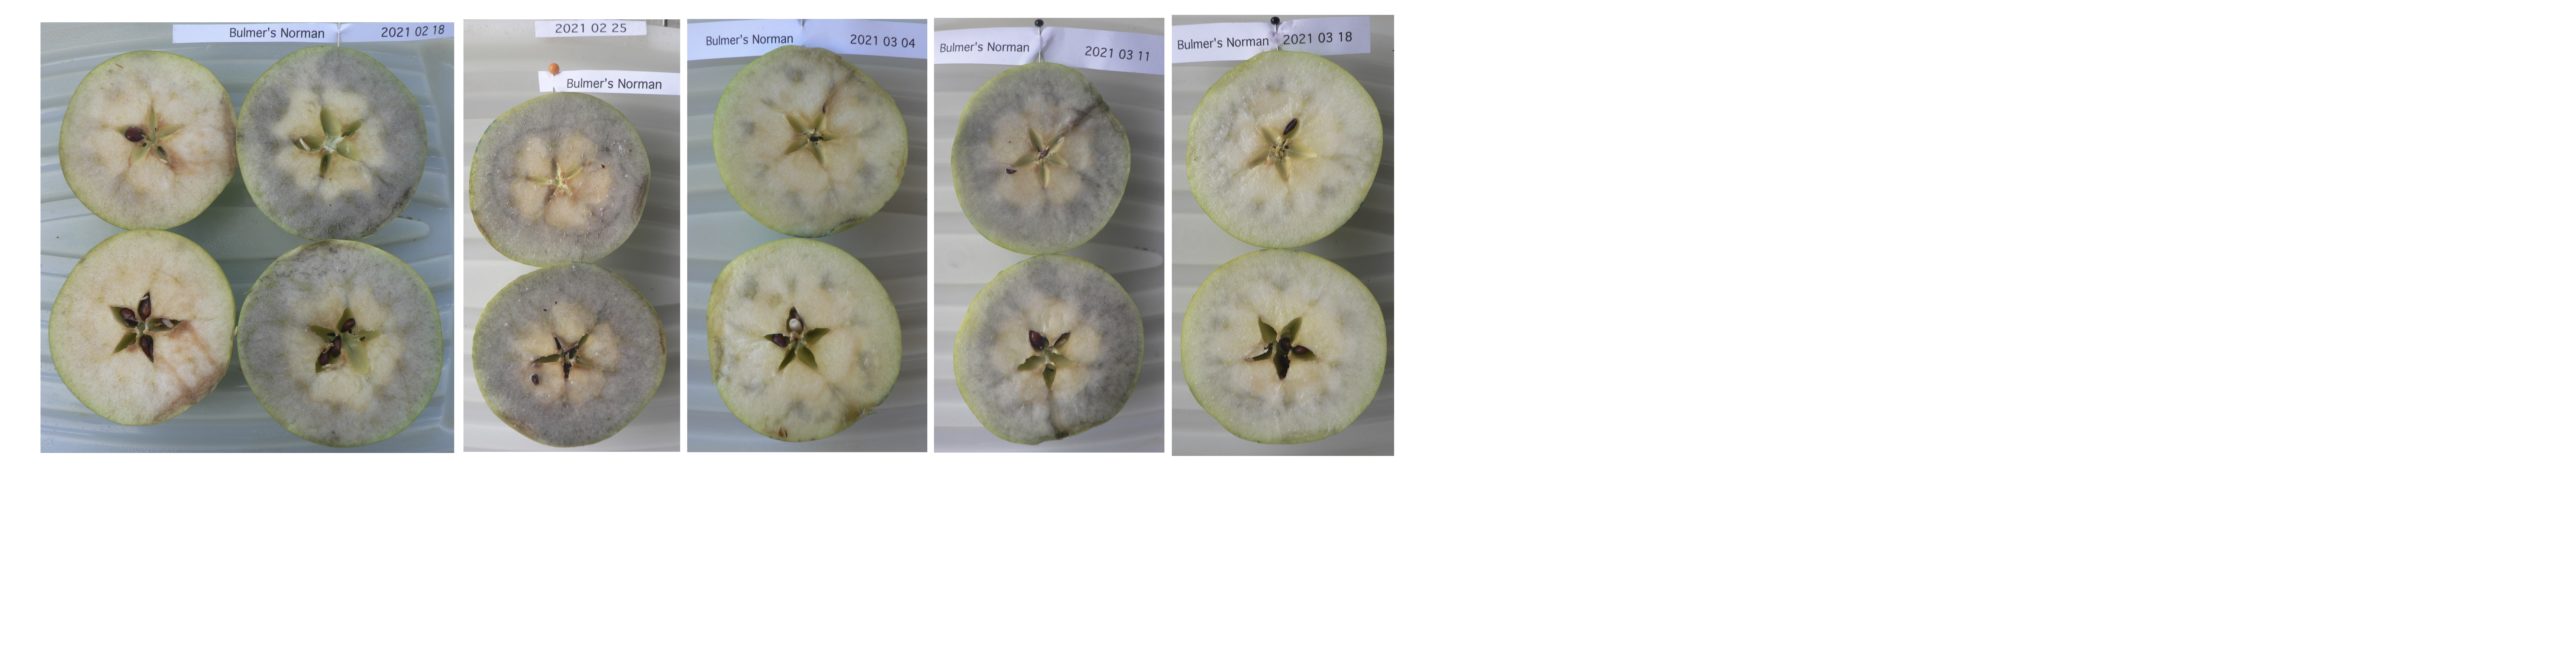 Check Apple Ripeness with the Starch Iodine Test